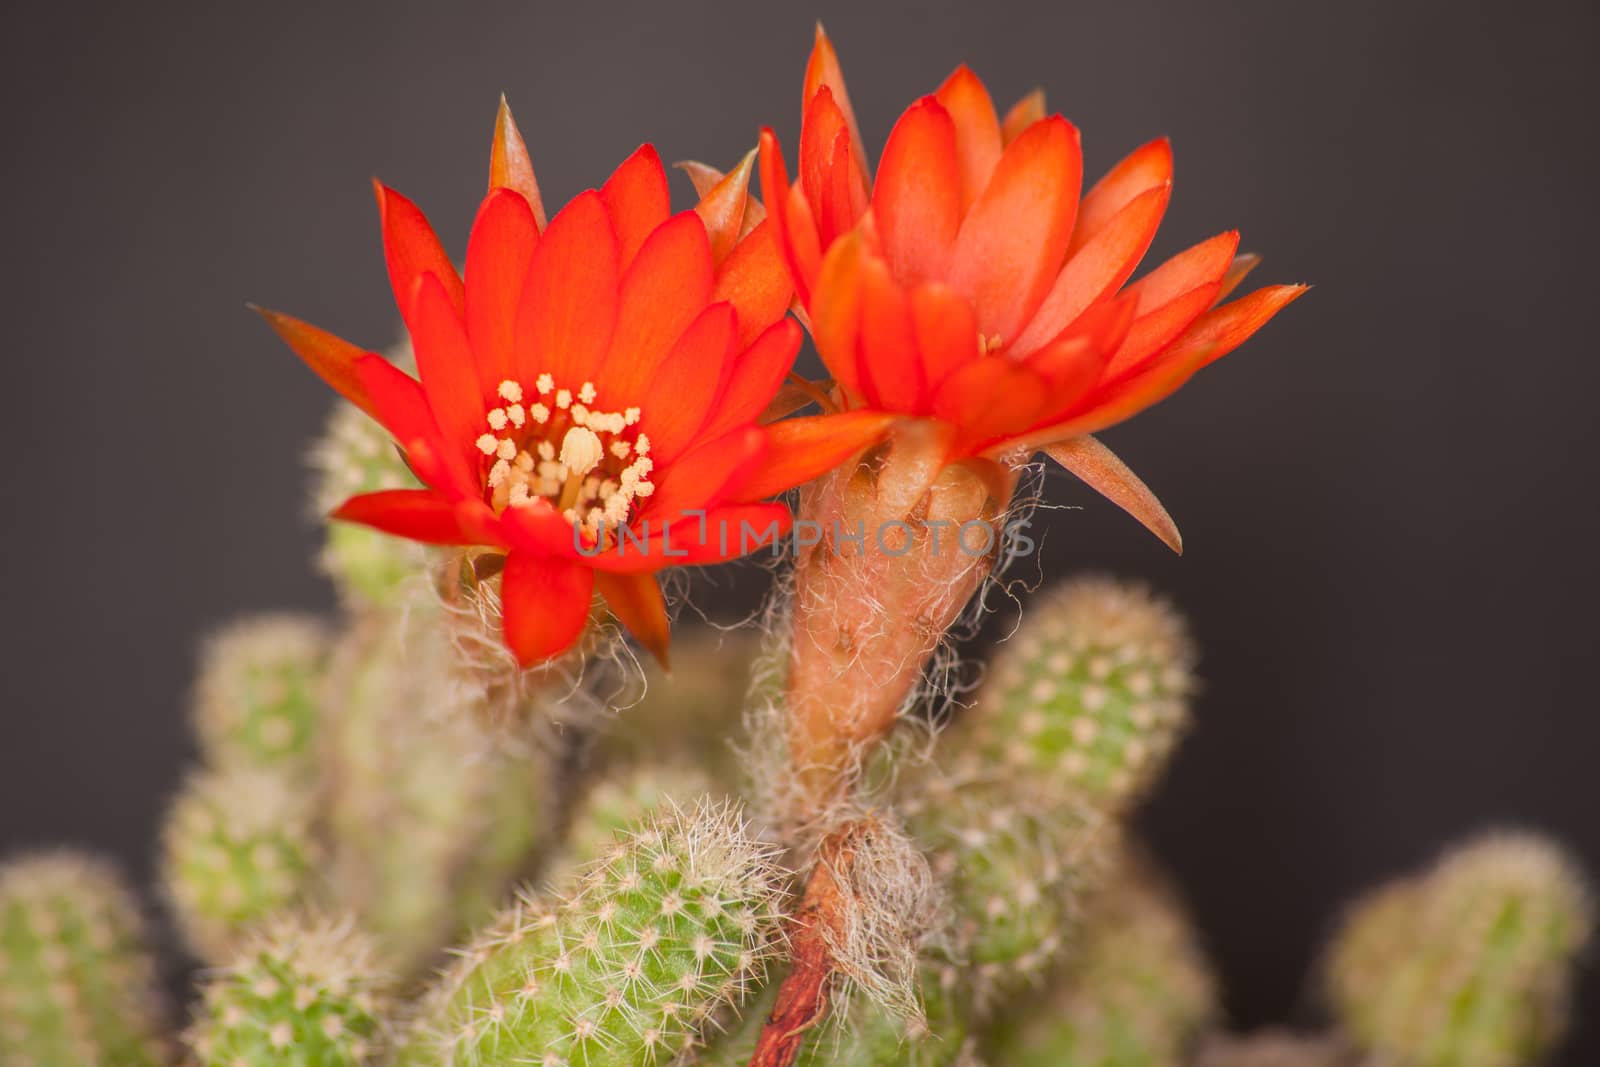 Red Flower of Echinopsis sp. 10385 by kobus_peche